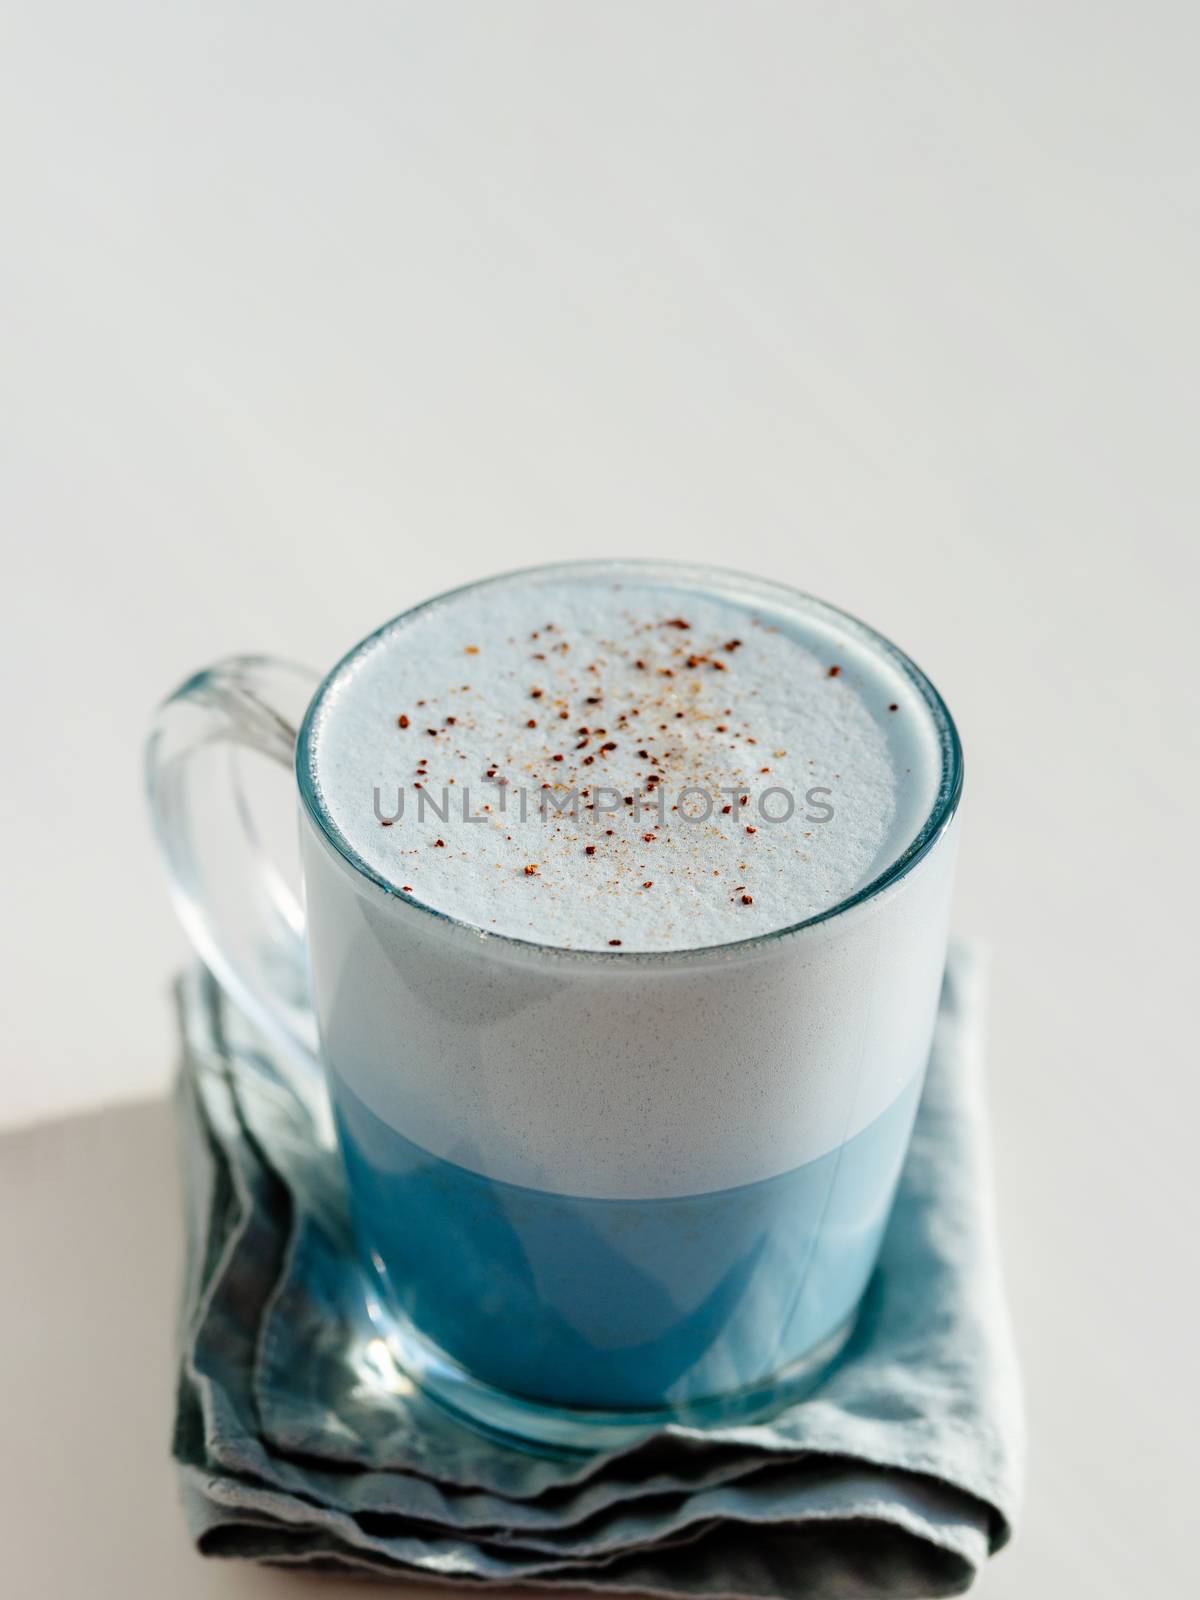 Blue pea latte or blue matcha latte with copy space. Hot fresh milk with blue butterfly pea flowers or clitoria ternatea latte in glass cup at natural sunset hard light. White background. Vertical